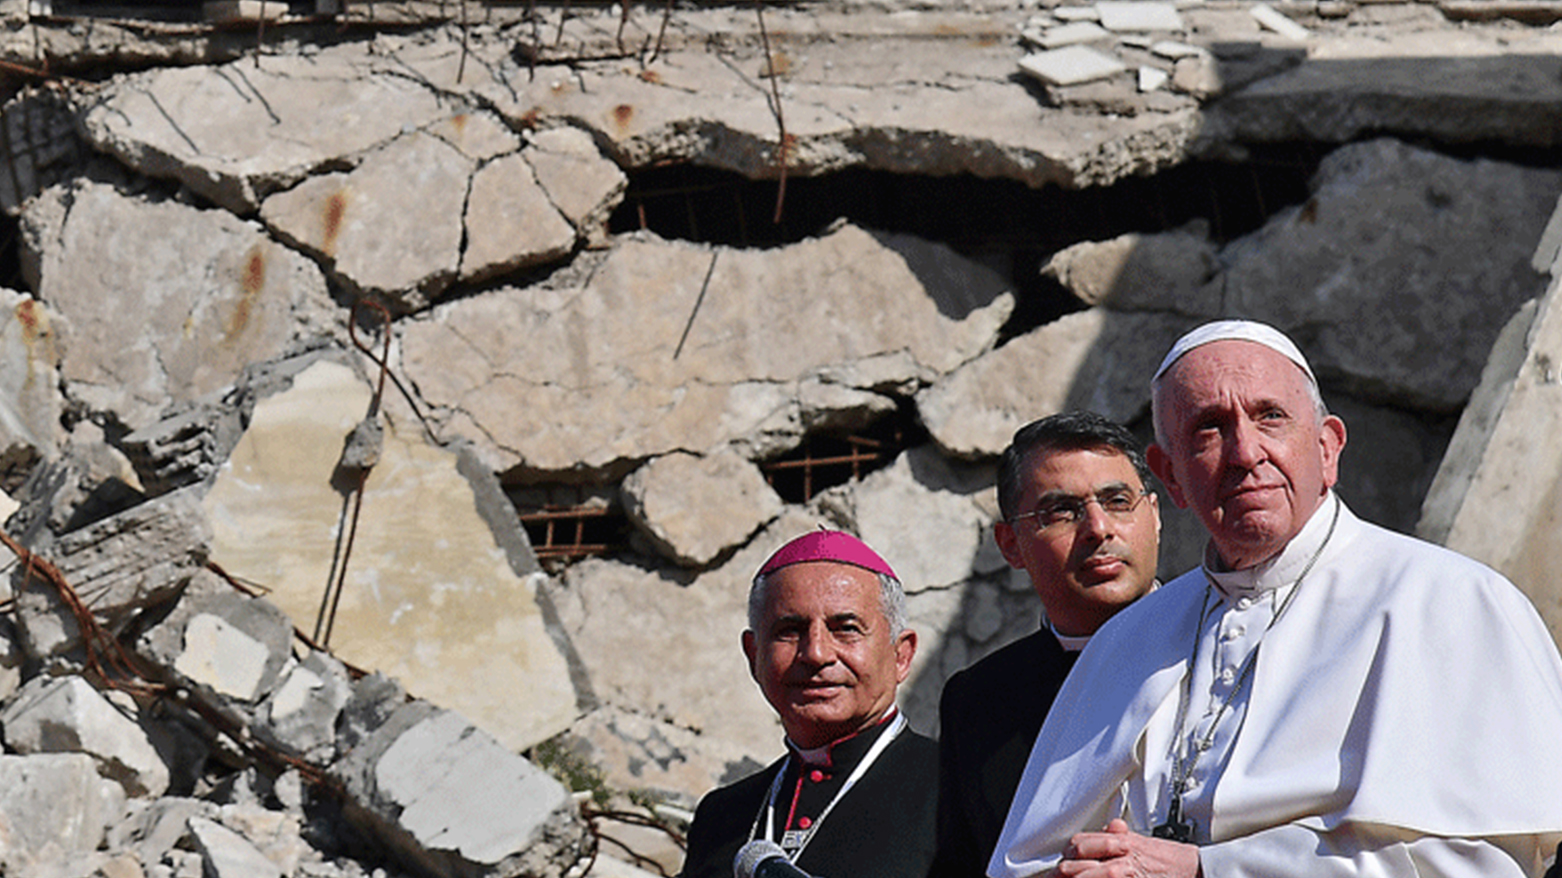 Pope Francis (right) tours ruins of the Syriac Catholic Church of the Immaculate Conception (al-Tahira-l-Kubra), in the northern Iraqi city of Mosul, March 7, 2021. (Photo: AFP/Vincenzo Pinto)